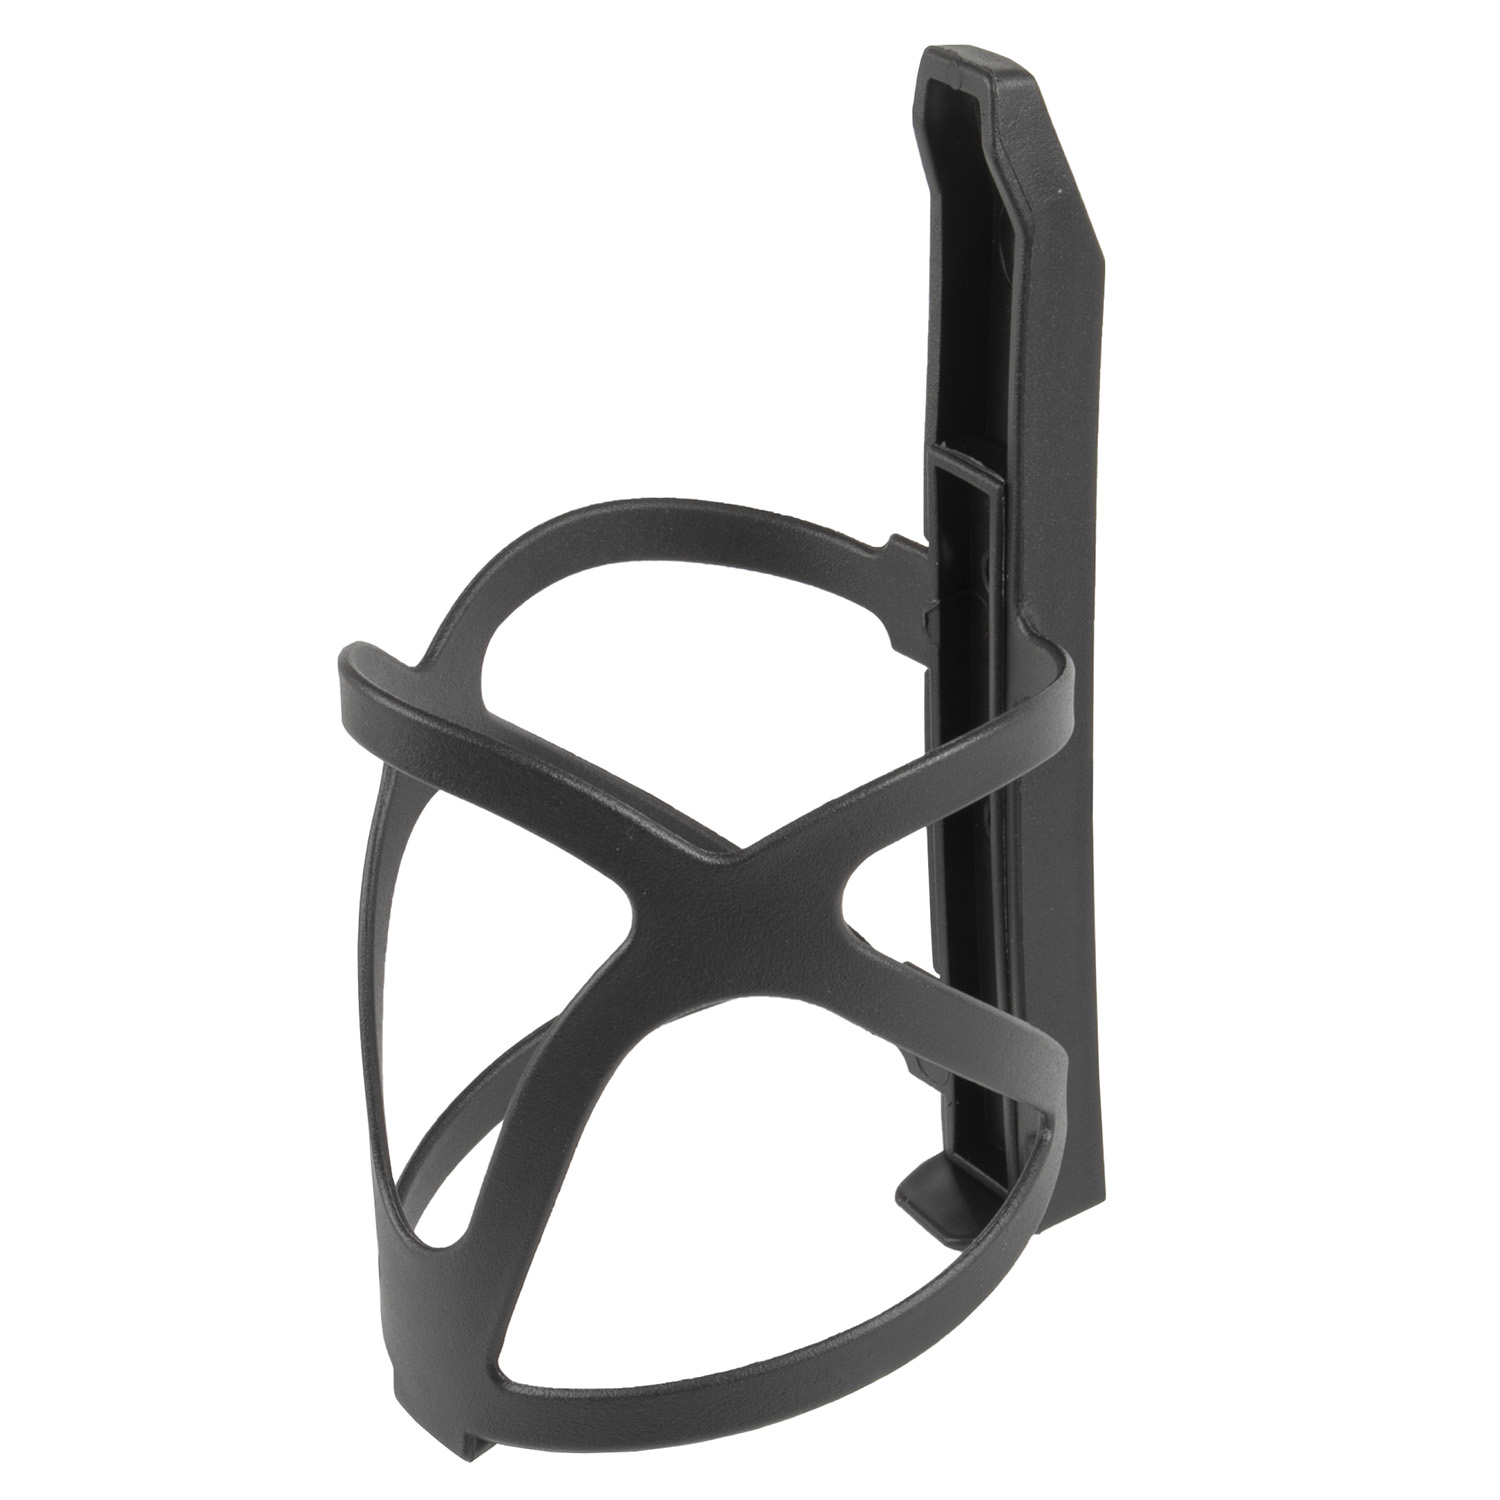 340787 BC 29 bottle cage – AVAILABLE IN SELECTED BIKE SHOPS